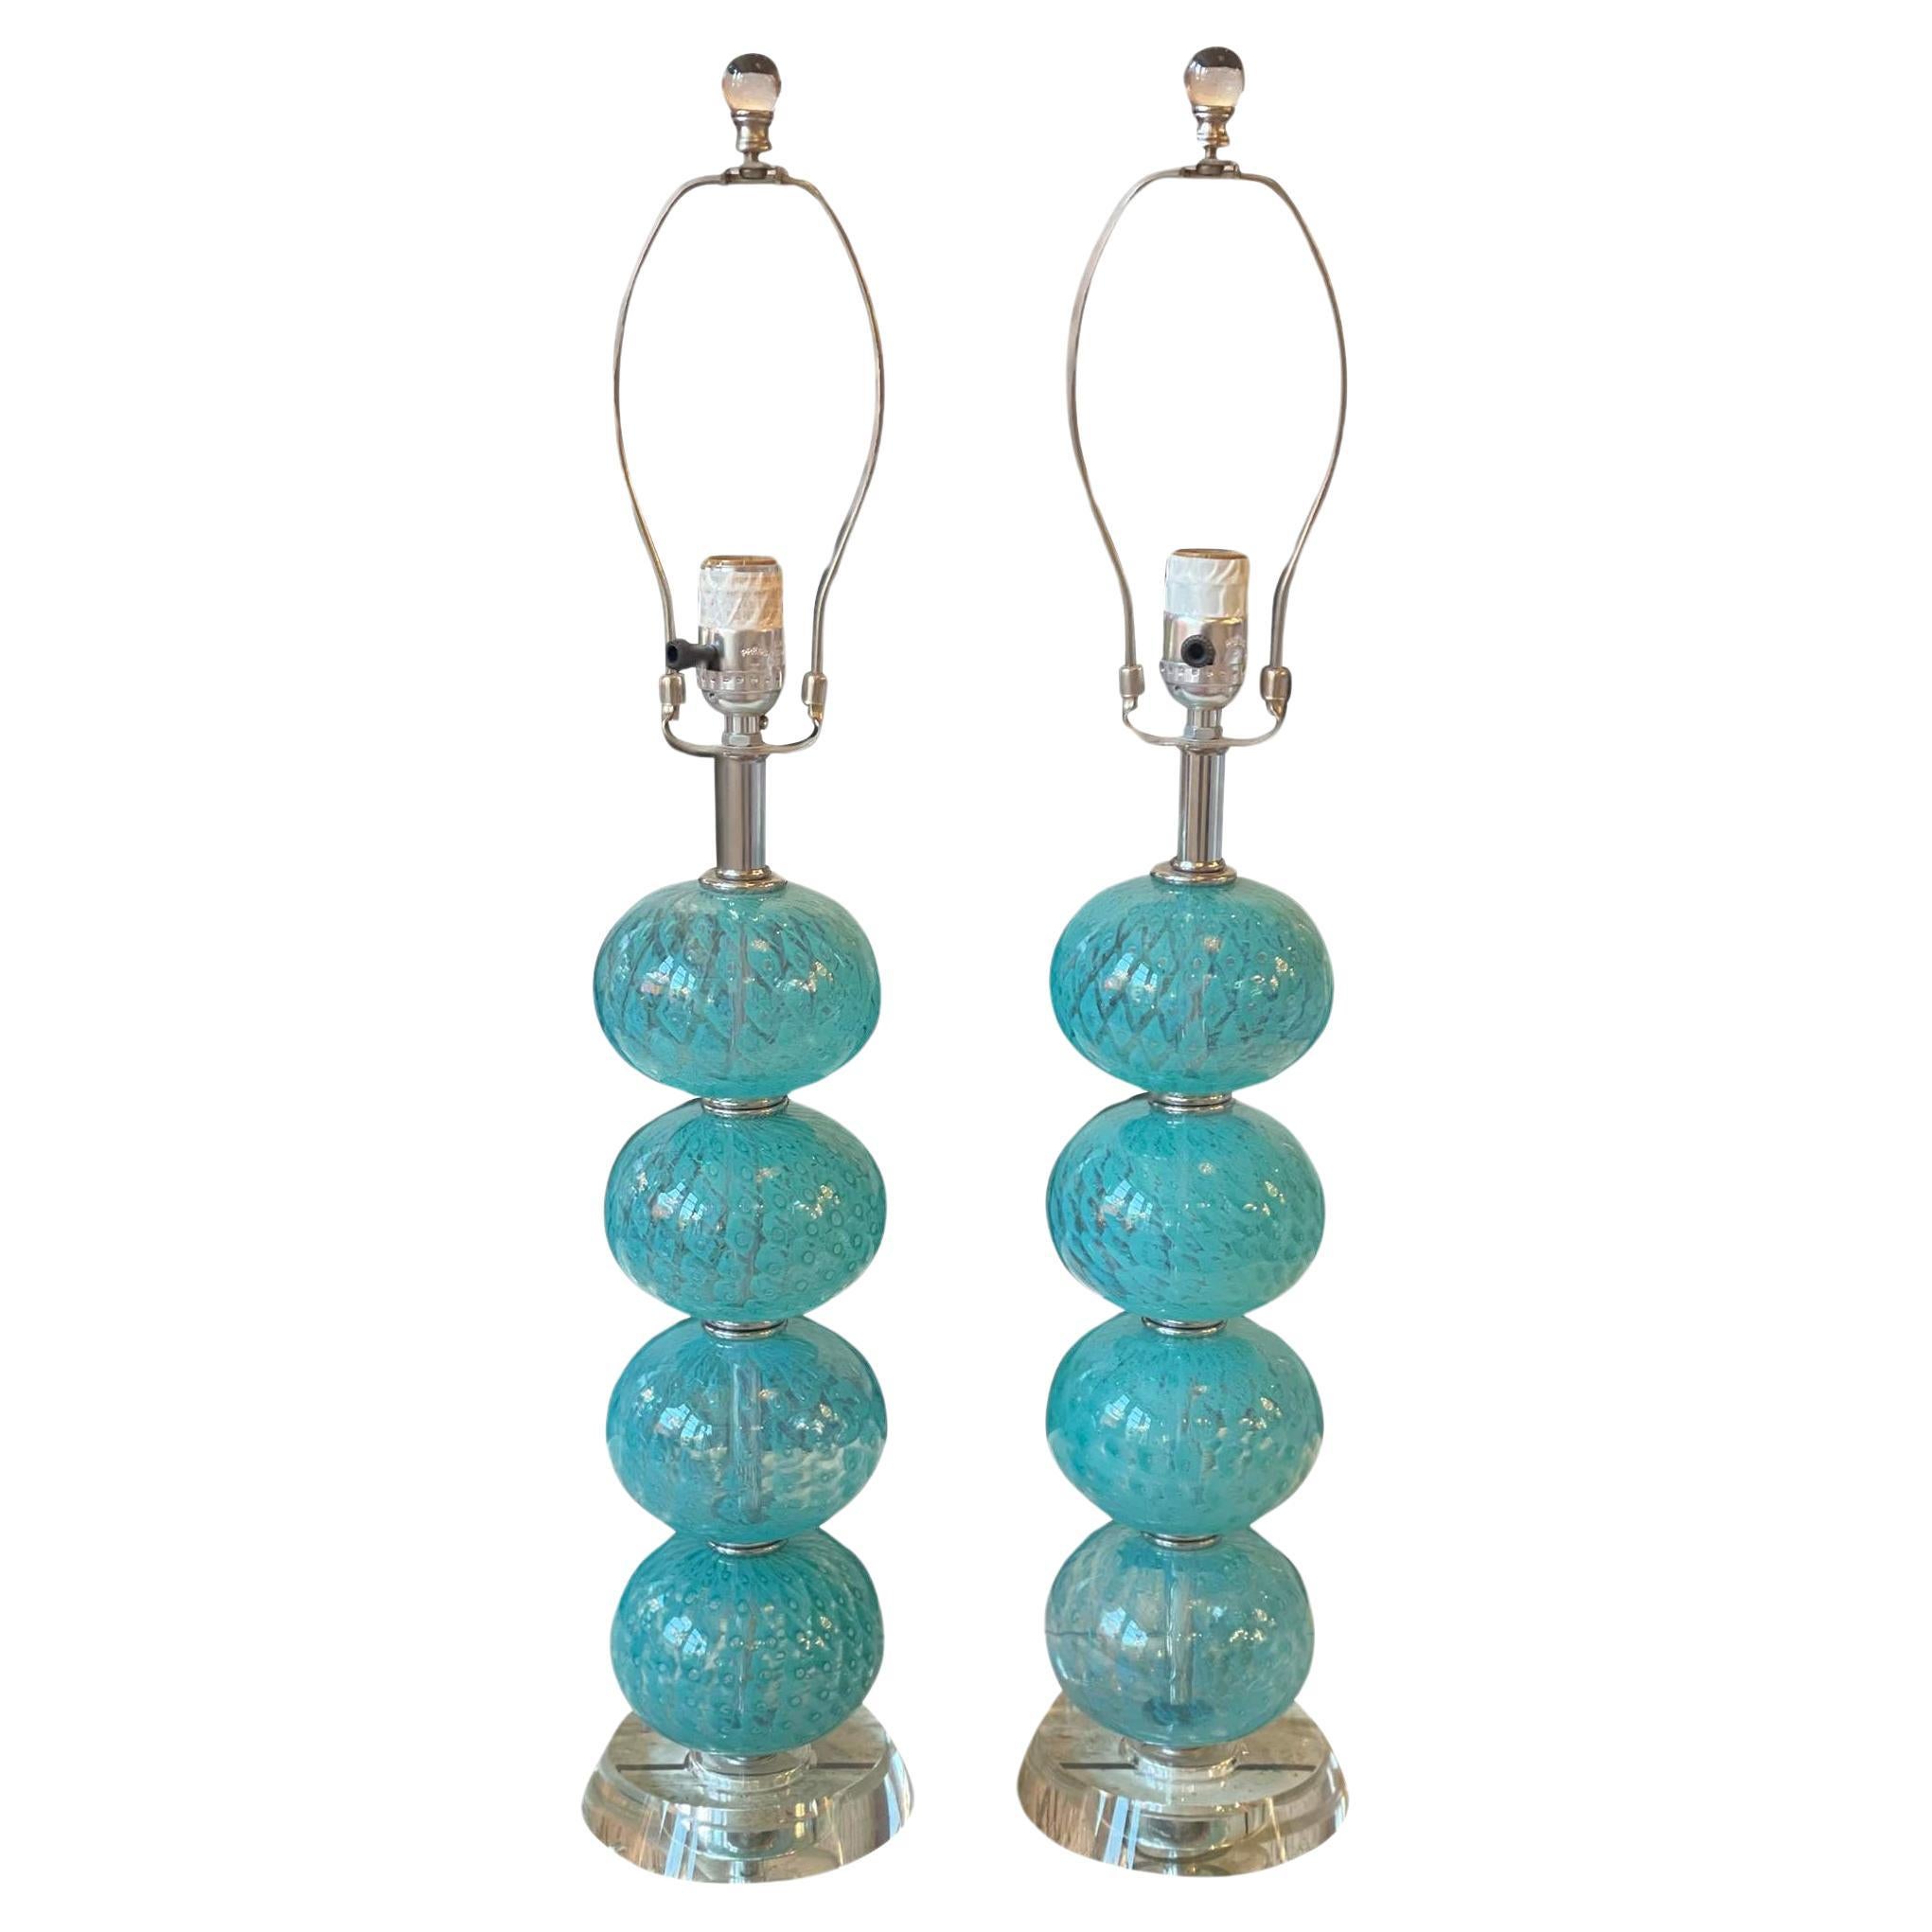 Vintage Blue Murano Lamps - a Pair